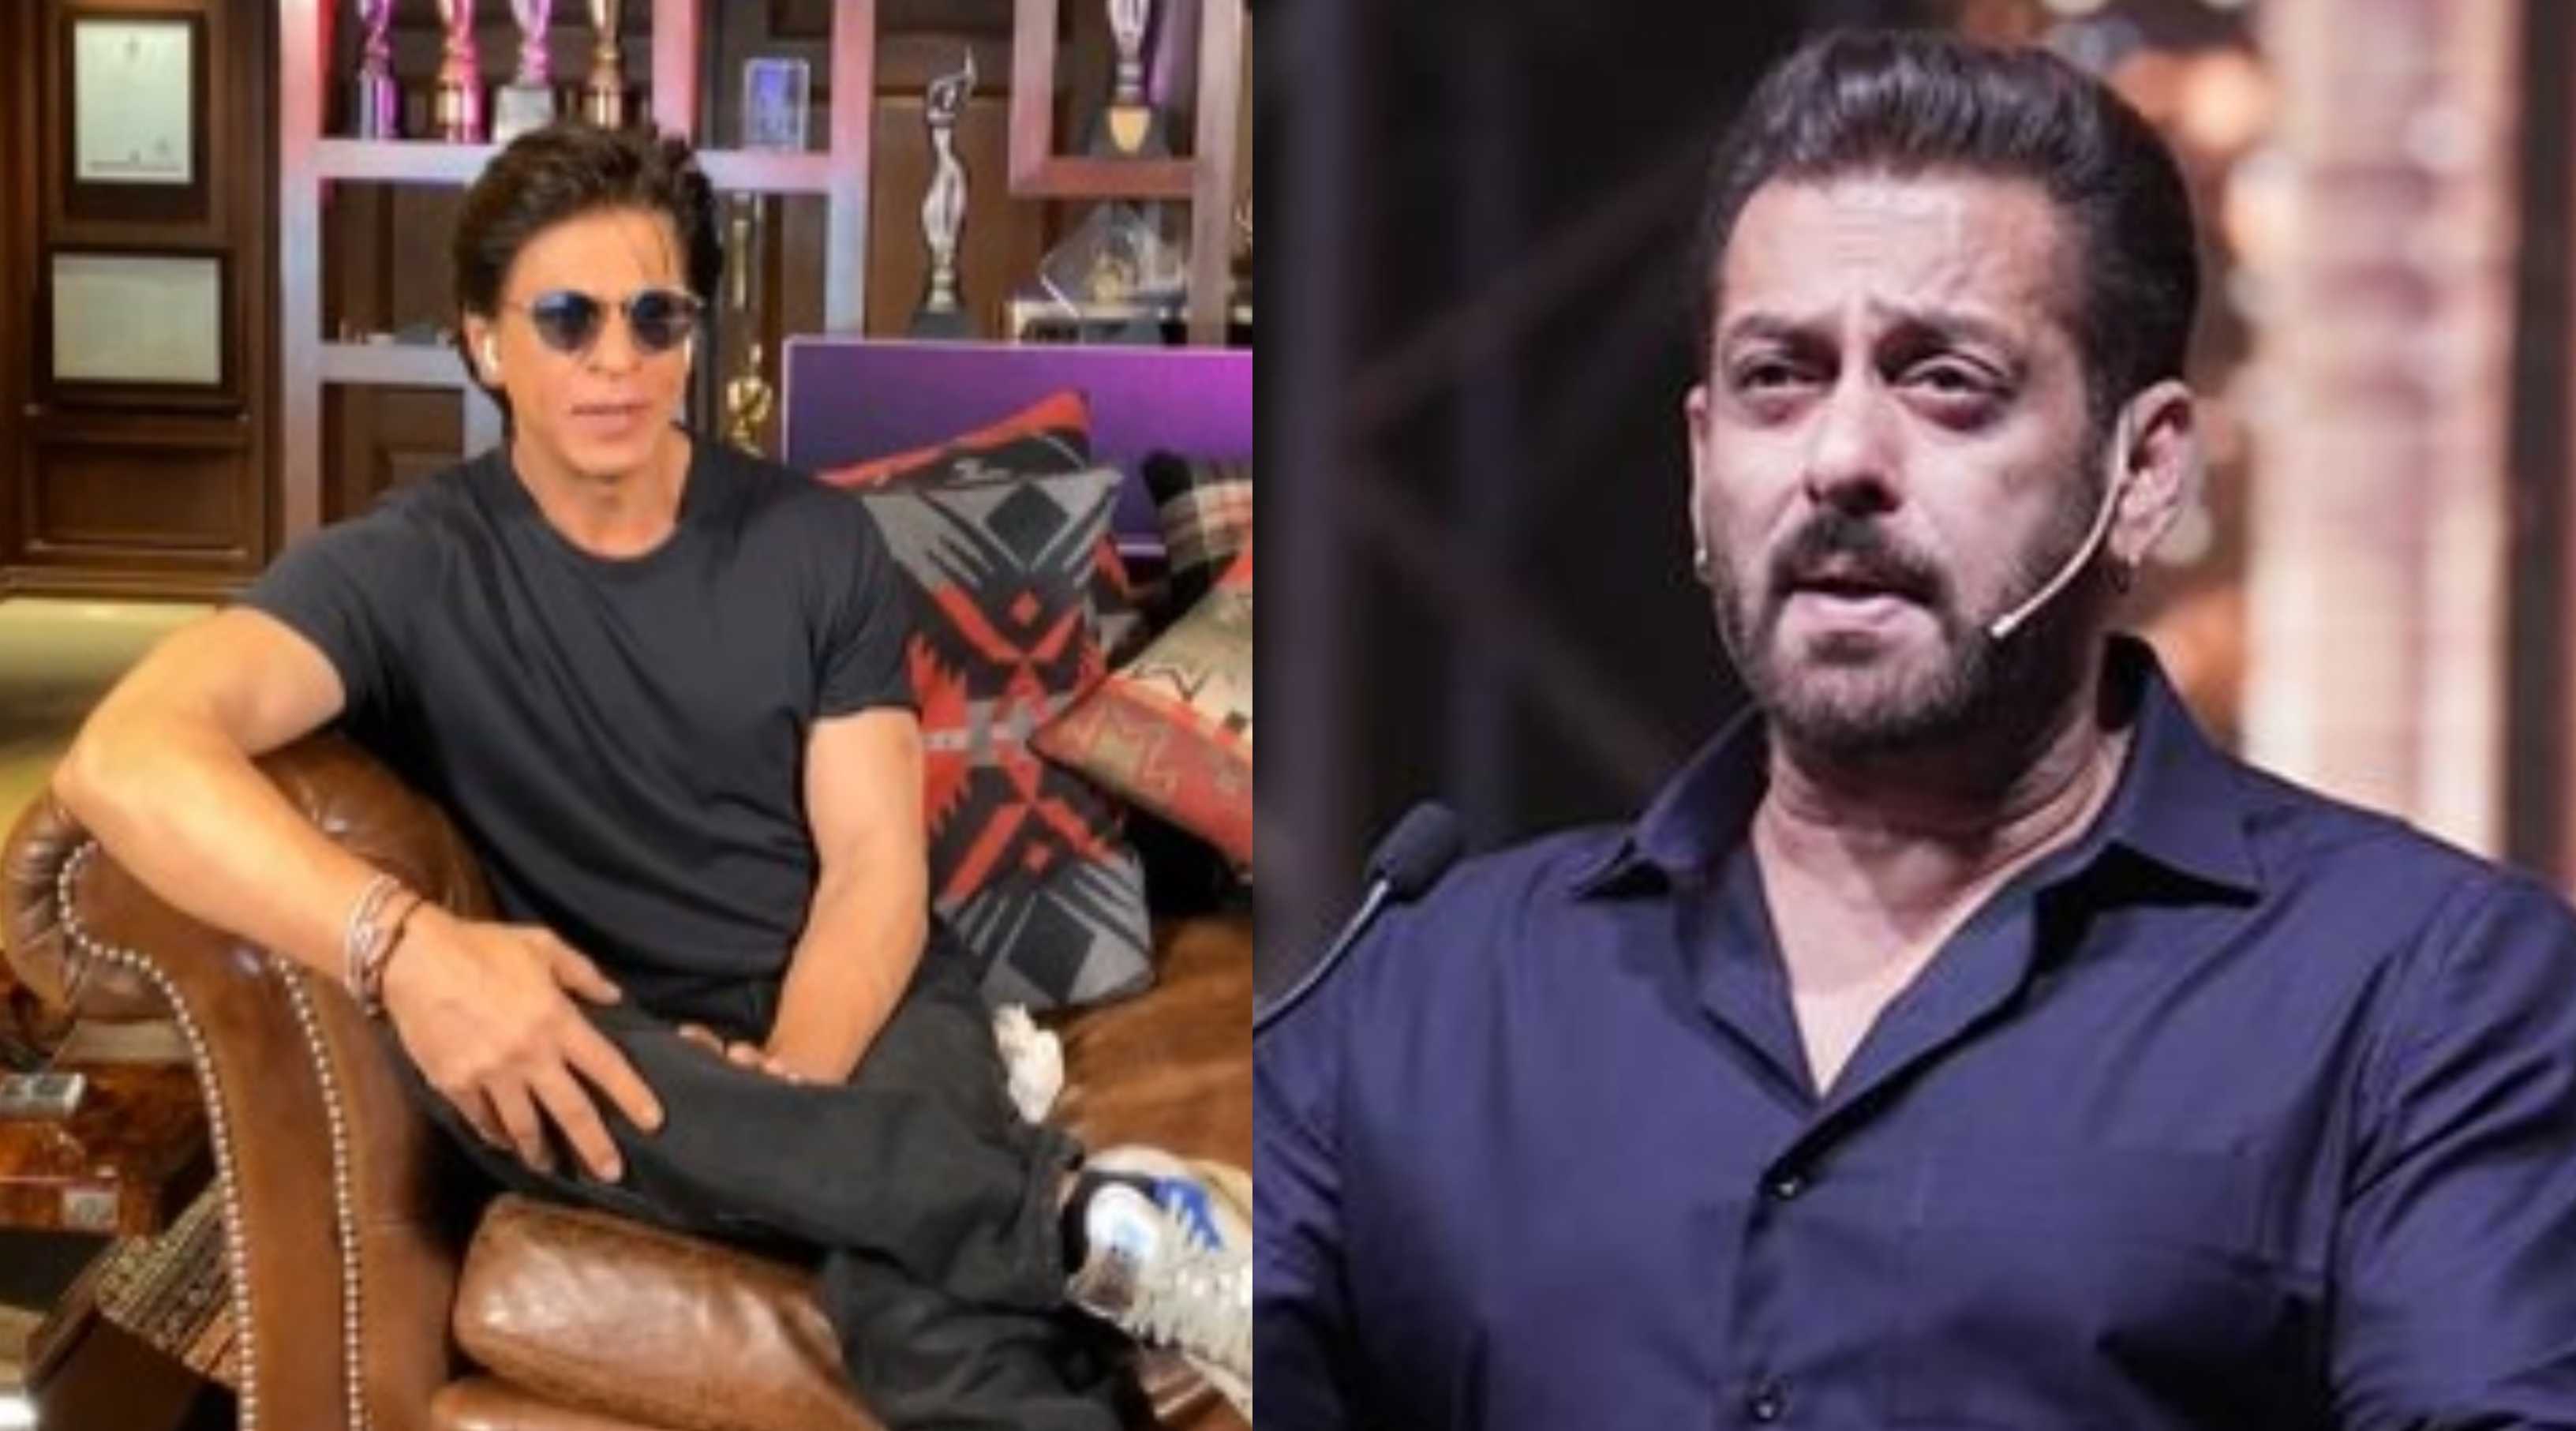 Shah Rukh Khan confirms his cameo in Salman Khan’s Tiger 3, says ‘I got to be in his film; he is like a brother’